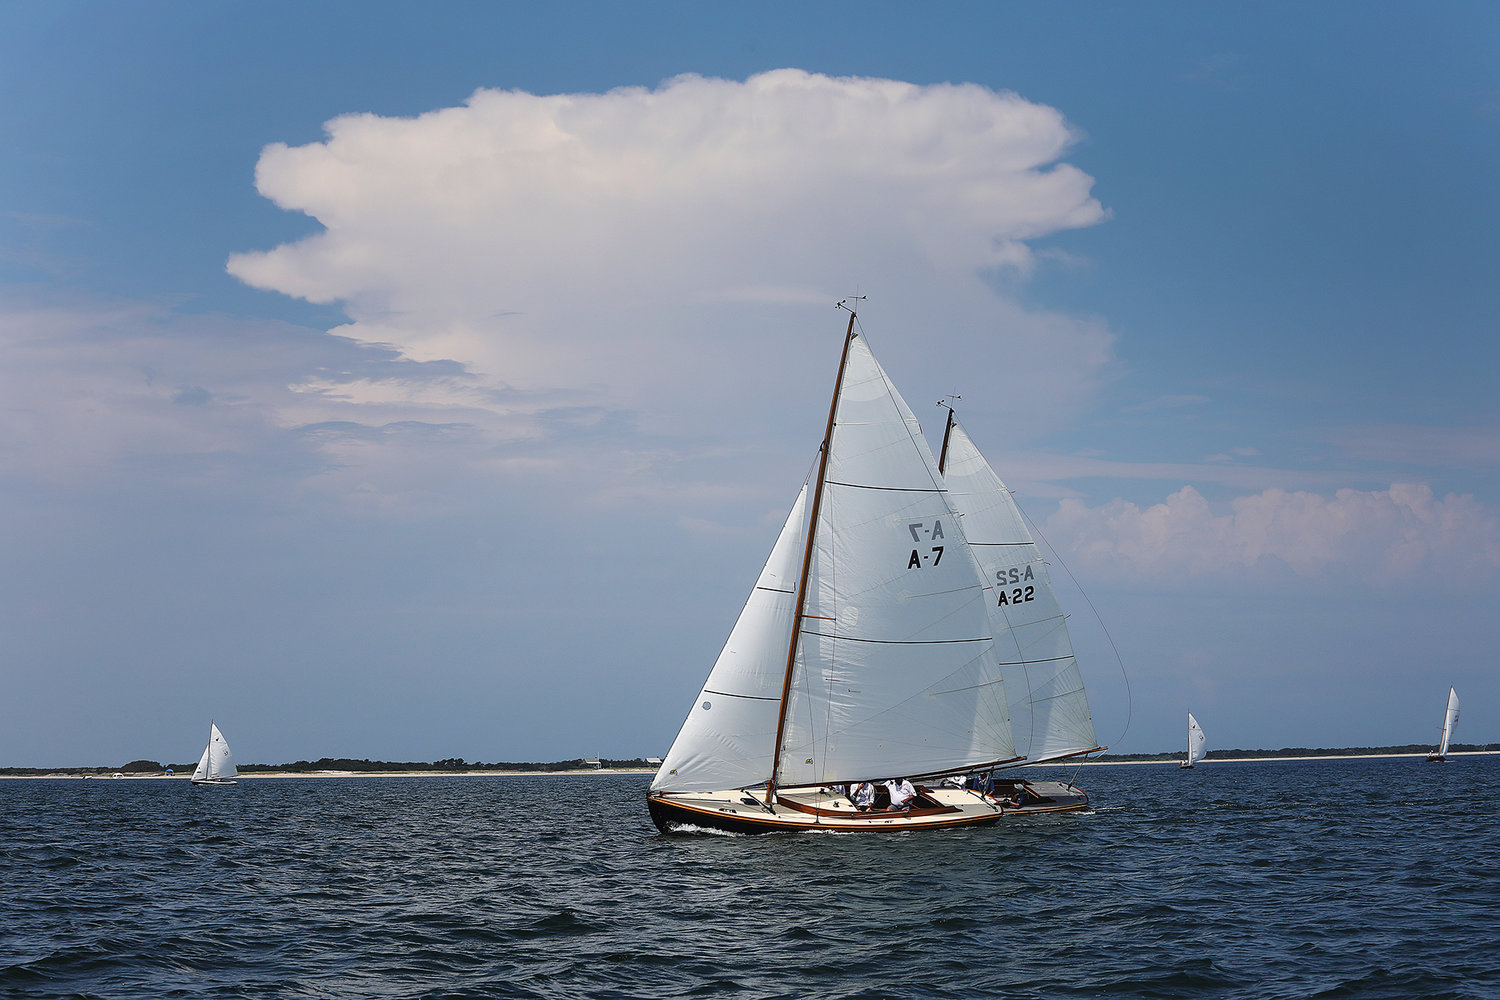 Java (A7) captained by Harvey Jones and Second Wind compete in the Alerion division of the One Design Regatta in Nantucket Harbor on the opening day of Race Week 2021.